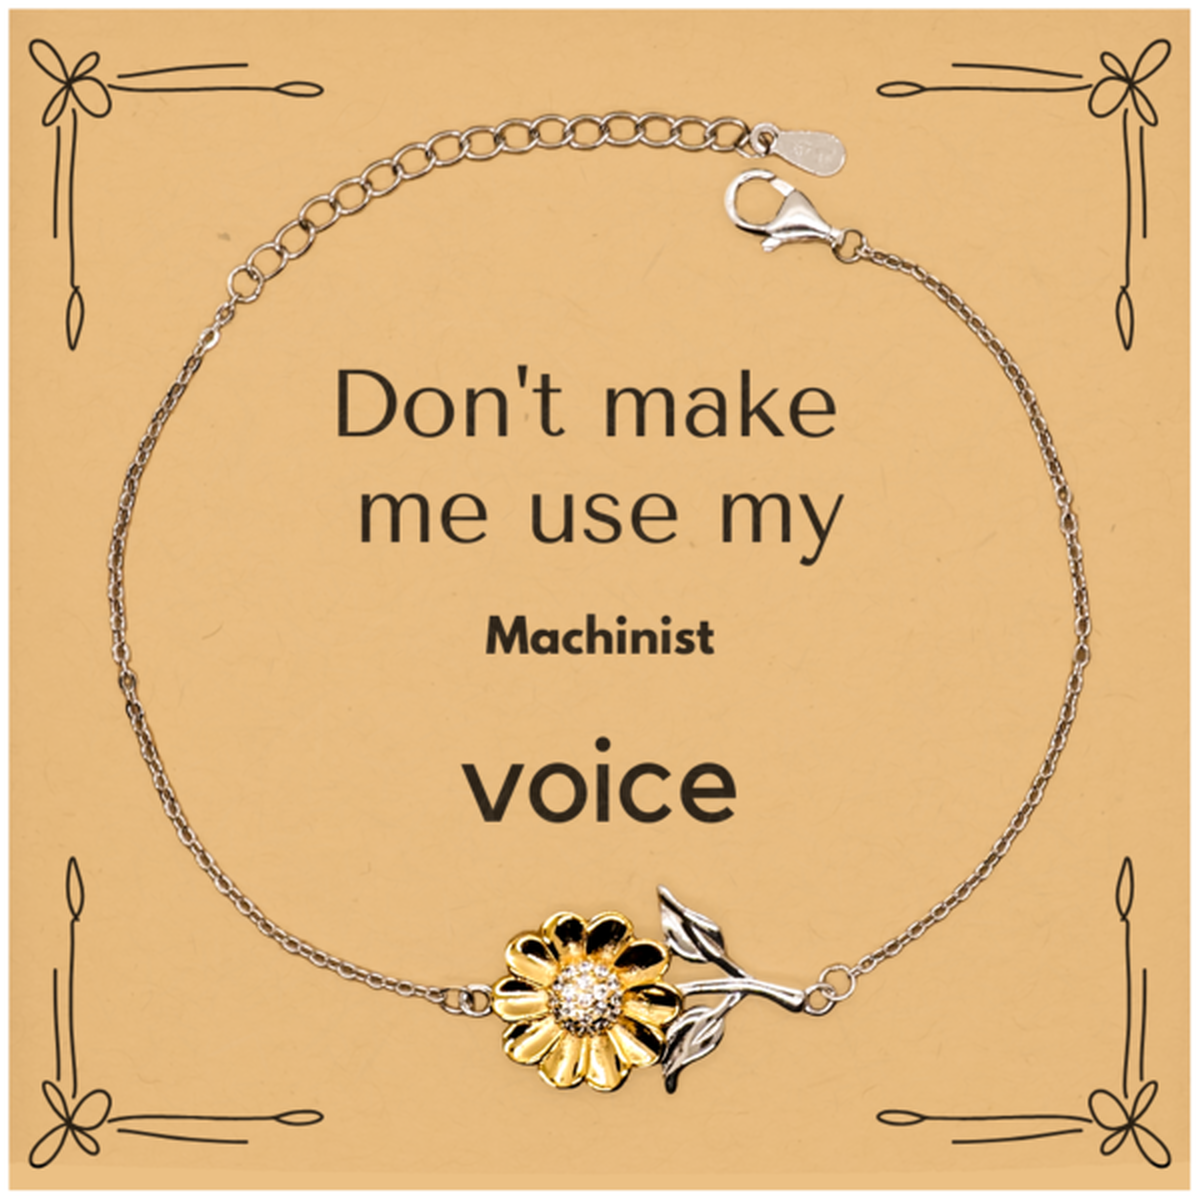 Don't make me use my Machinist voice, Sarcasm Machinist Card Gifts, Christmas Machinist Sunflower Bracelet Birthday Unique Gifts For Machinist Coworkers, Men, Women, Colleague, Friends